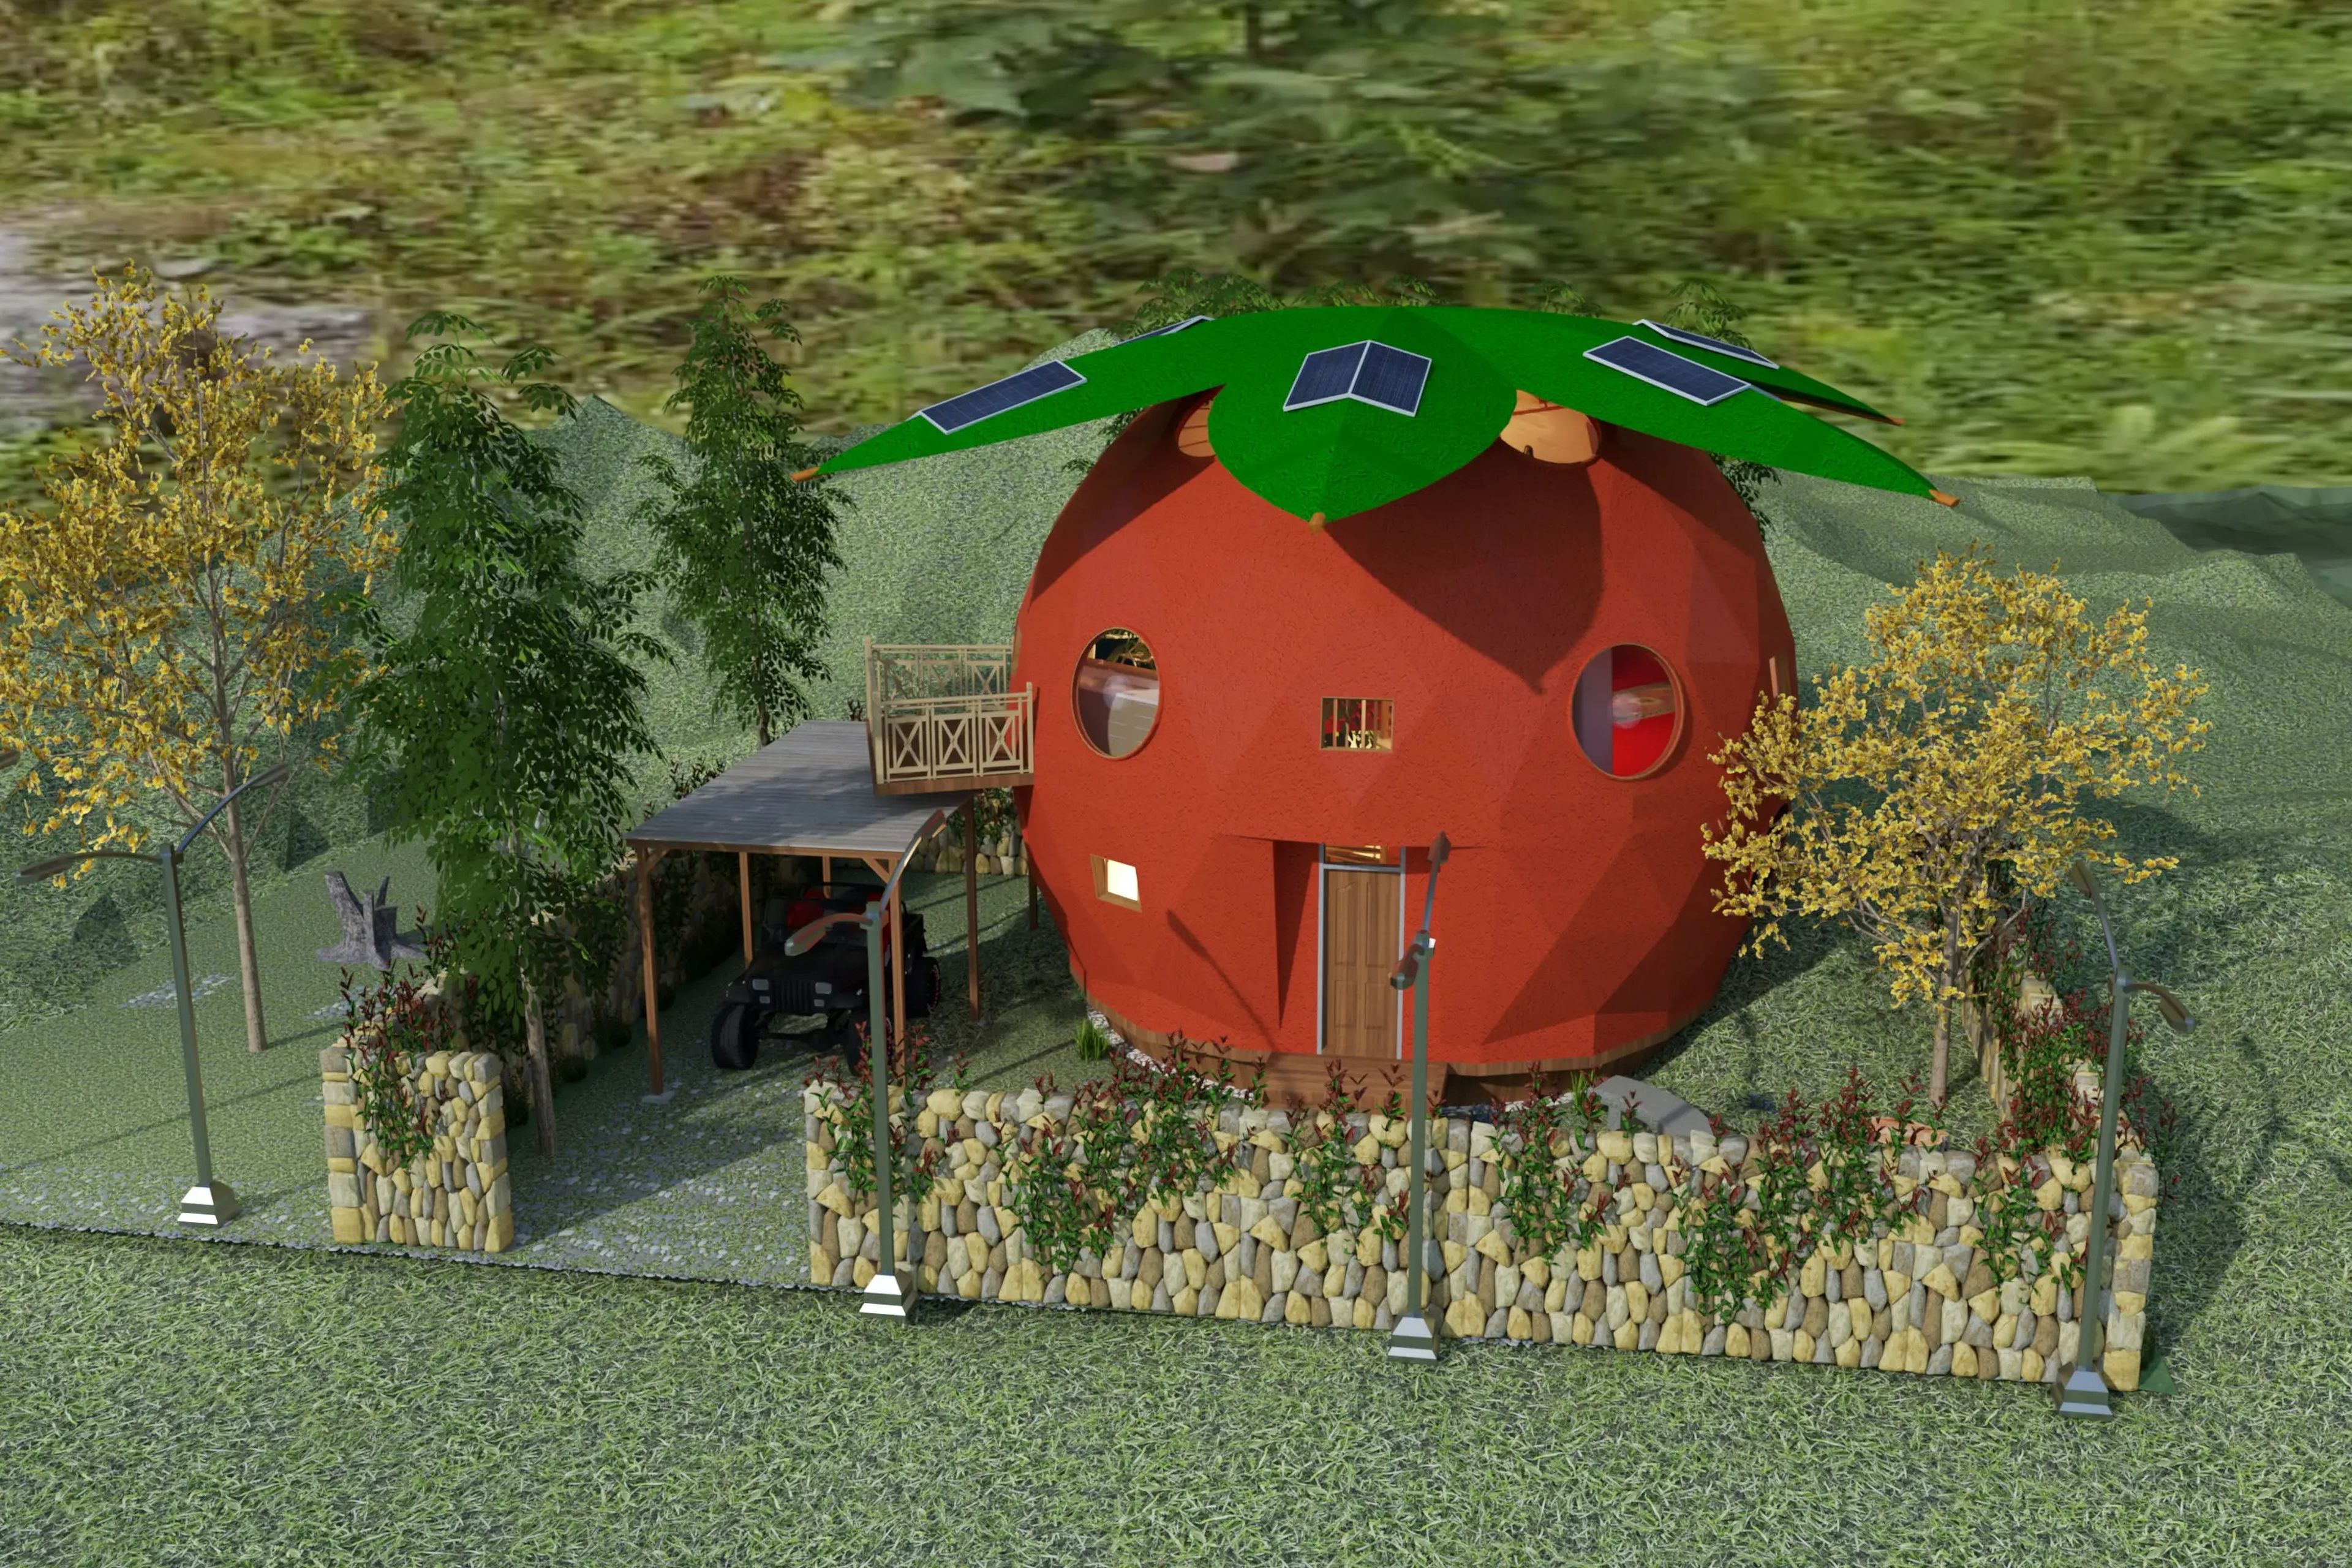 Himalayan Fruit Shaped Bedrooms created by Arun M. in India for Airbnb OMG! Fund